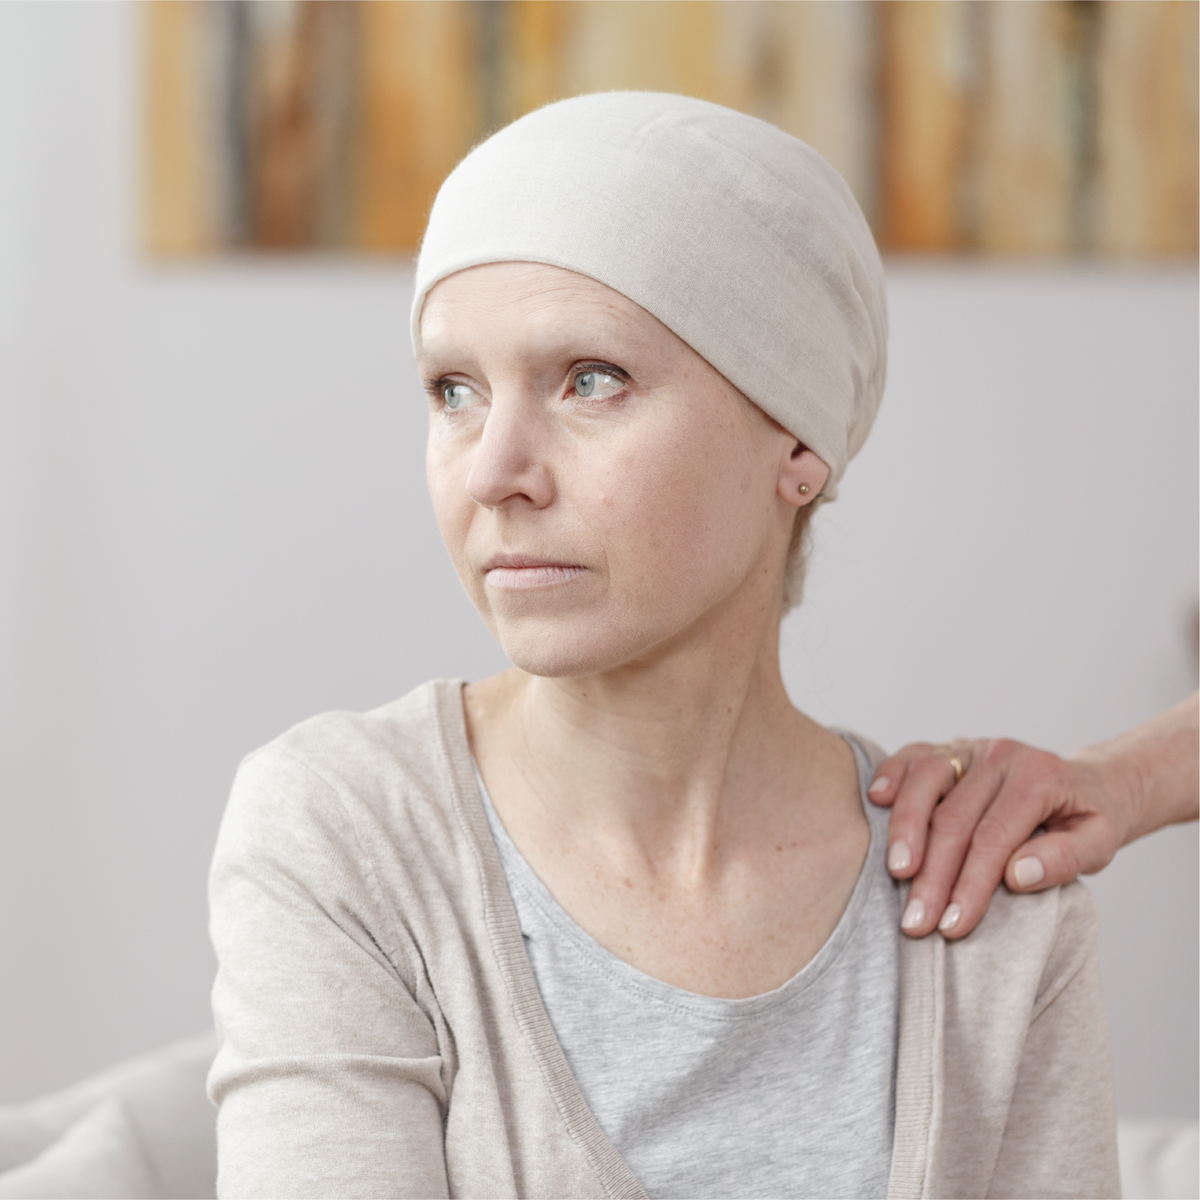 An upset woman with cancer